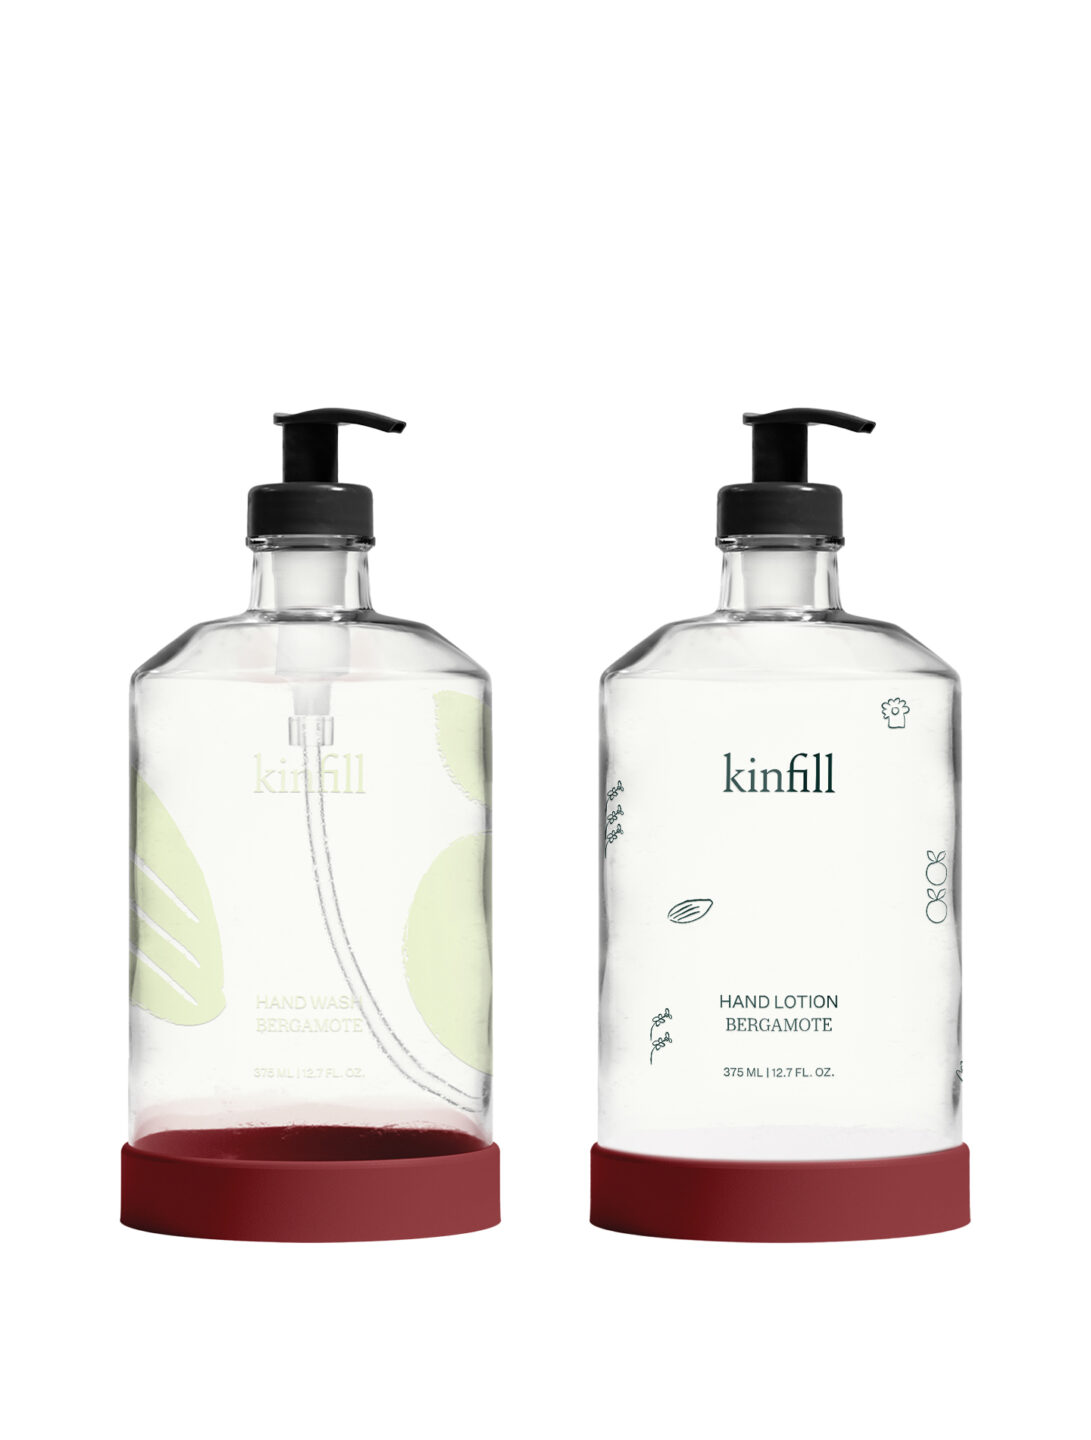 kinfill-hand-care-duo-bergamote-product-image